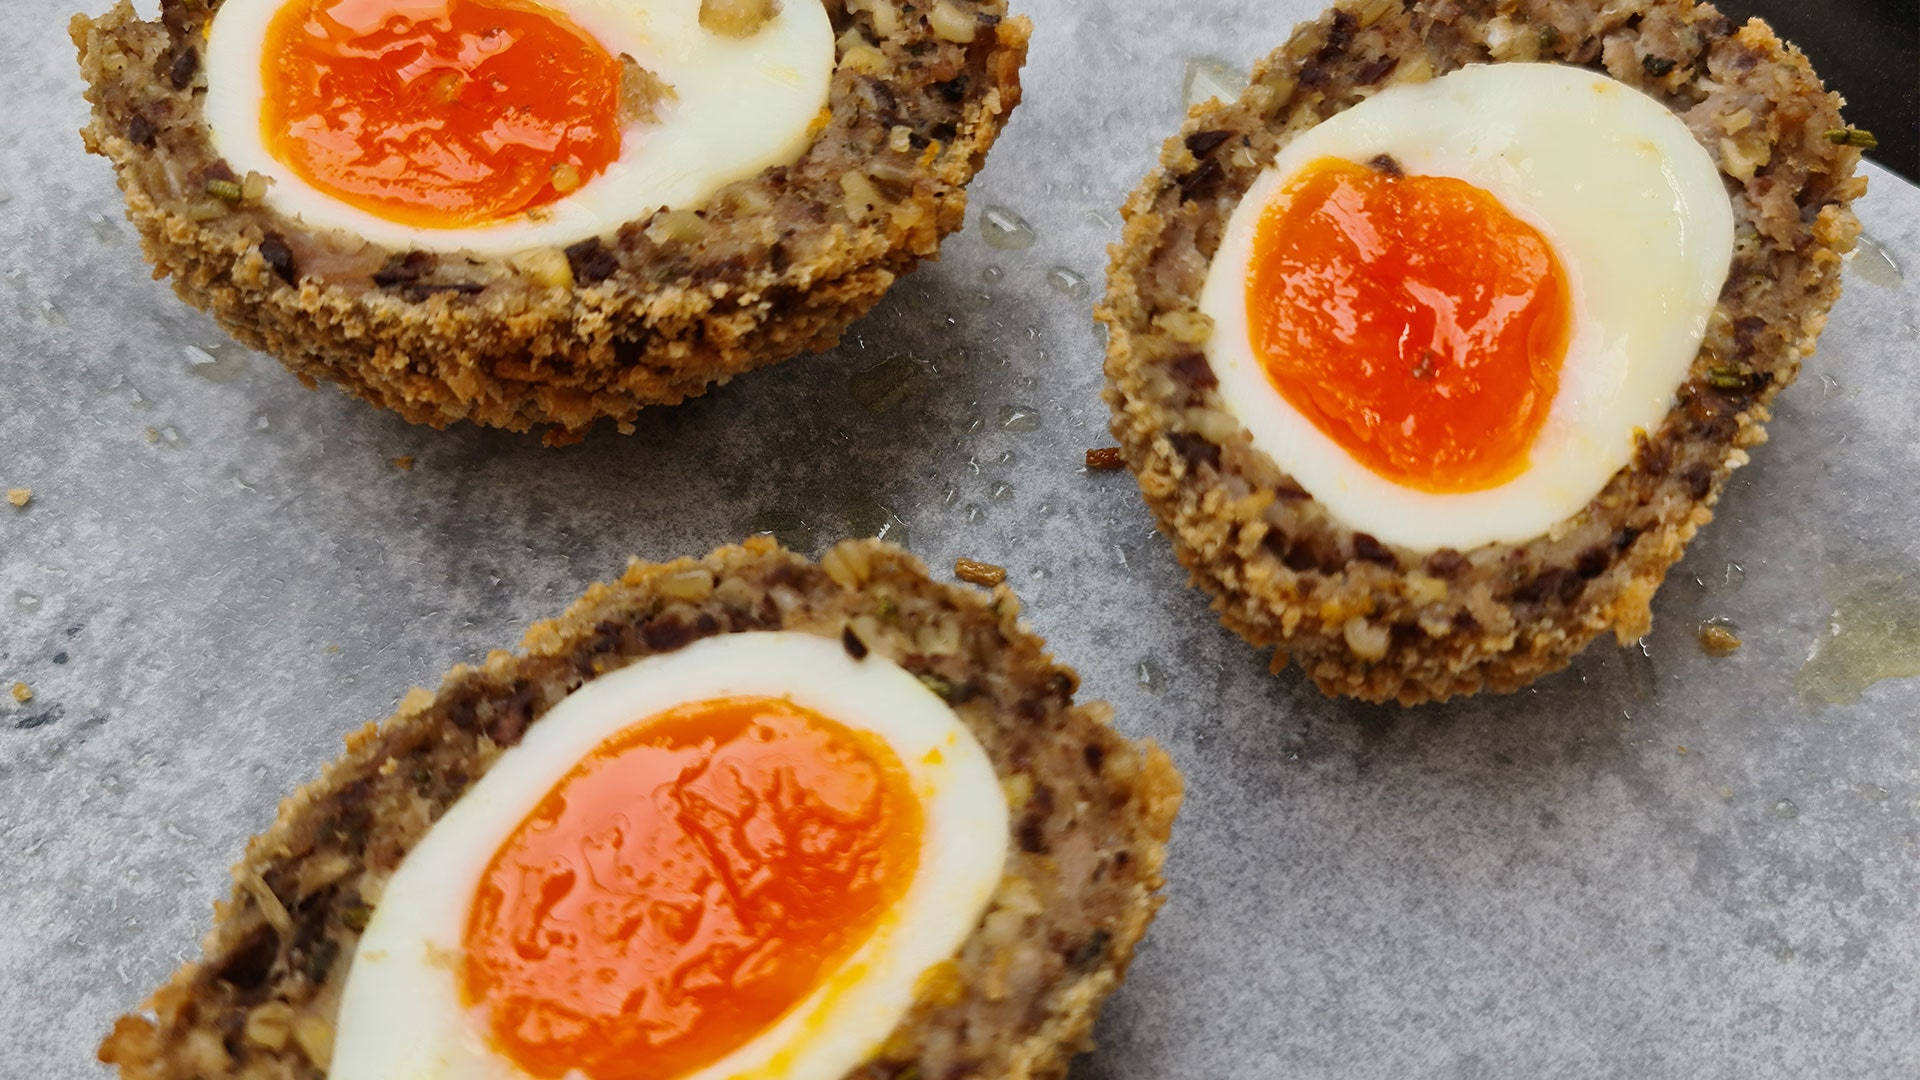 Läckratraditionella Brittiska Scotch Eggs-rätter På Papper. (assuming This Is Meant To Be A Description Of The Wallpaper Image, Not Sure How Scotch Eggs Fit Into A Computer Or Mobile Wallpaper Though!) Wallpaper